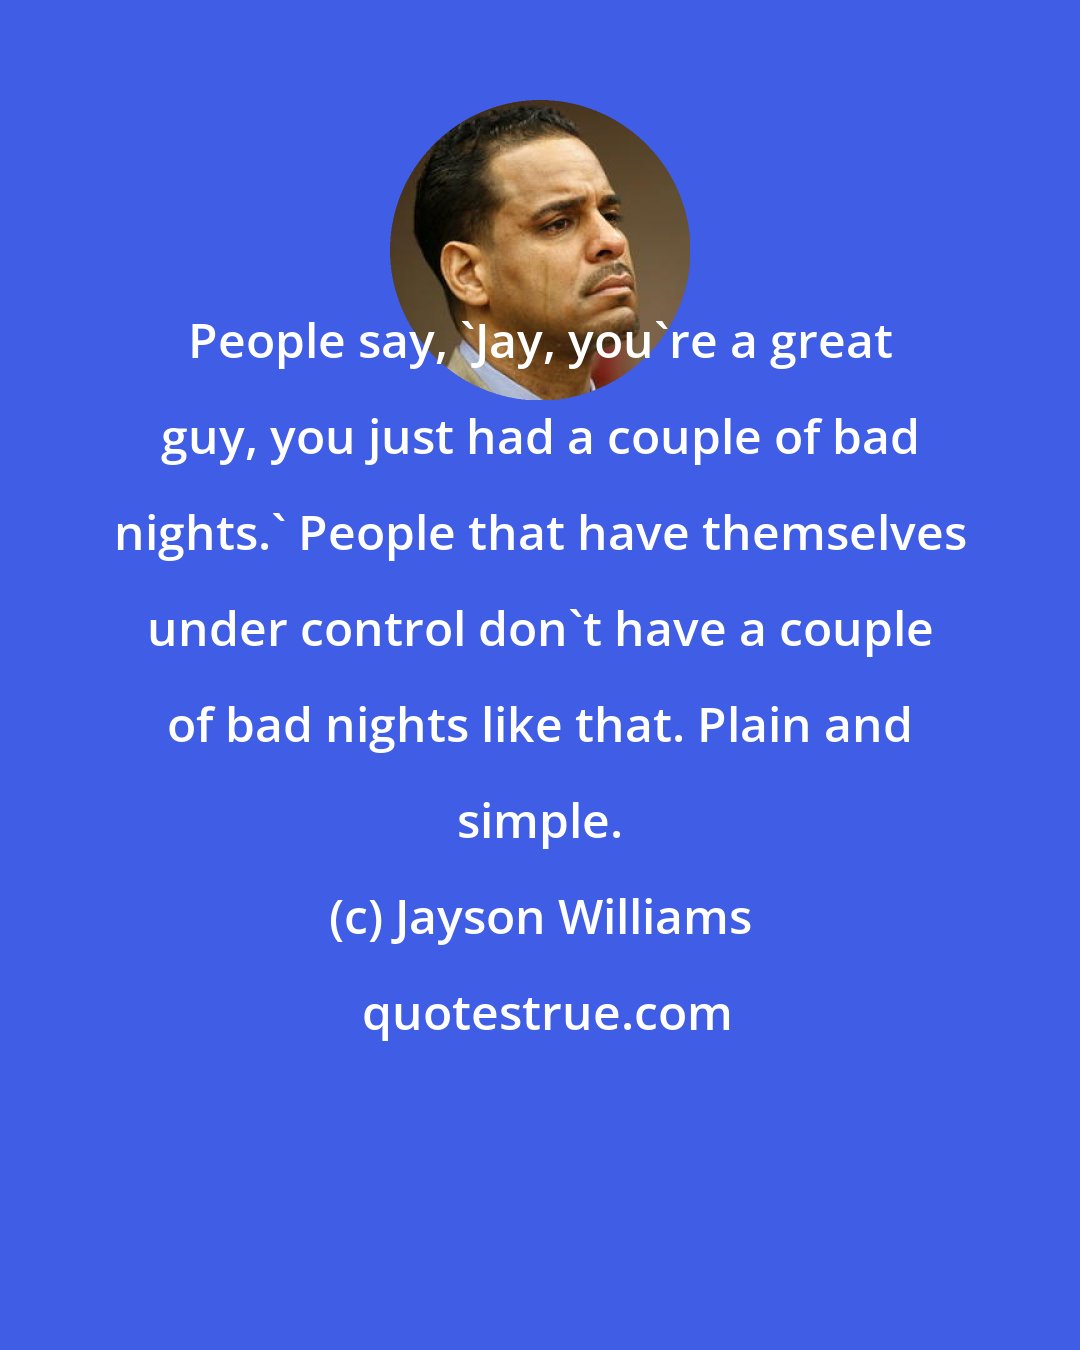 Jayson Williams: People say, 'Jay, you're a great guy, you just had a couple of bad nights.' People that have themselves under control don't have a couple of bad nights like that. Plain and simple.